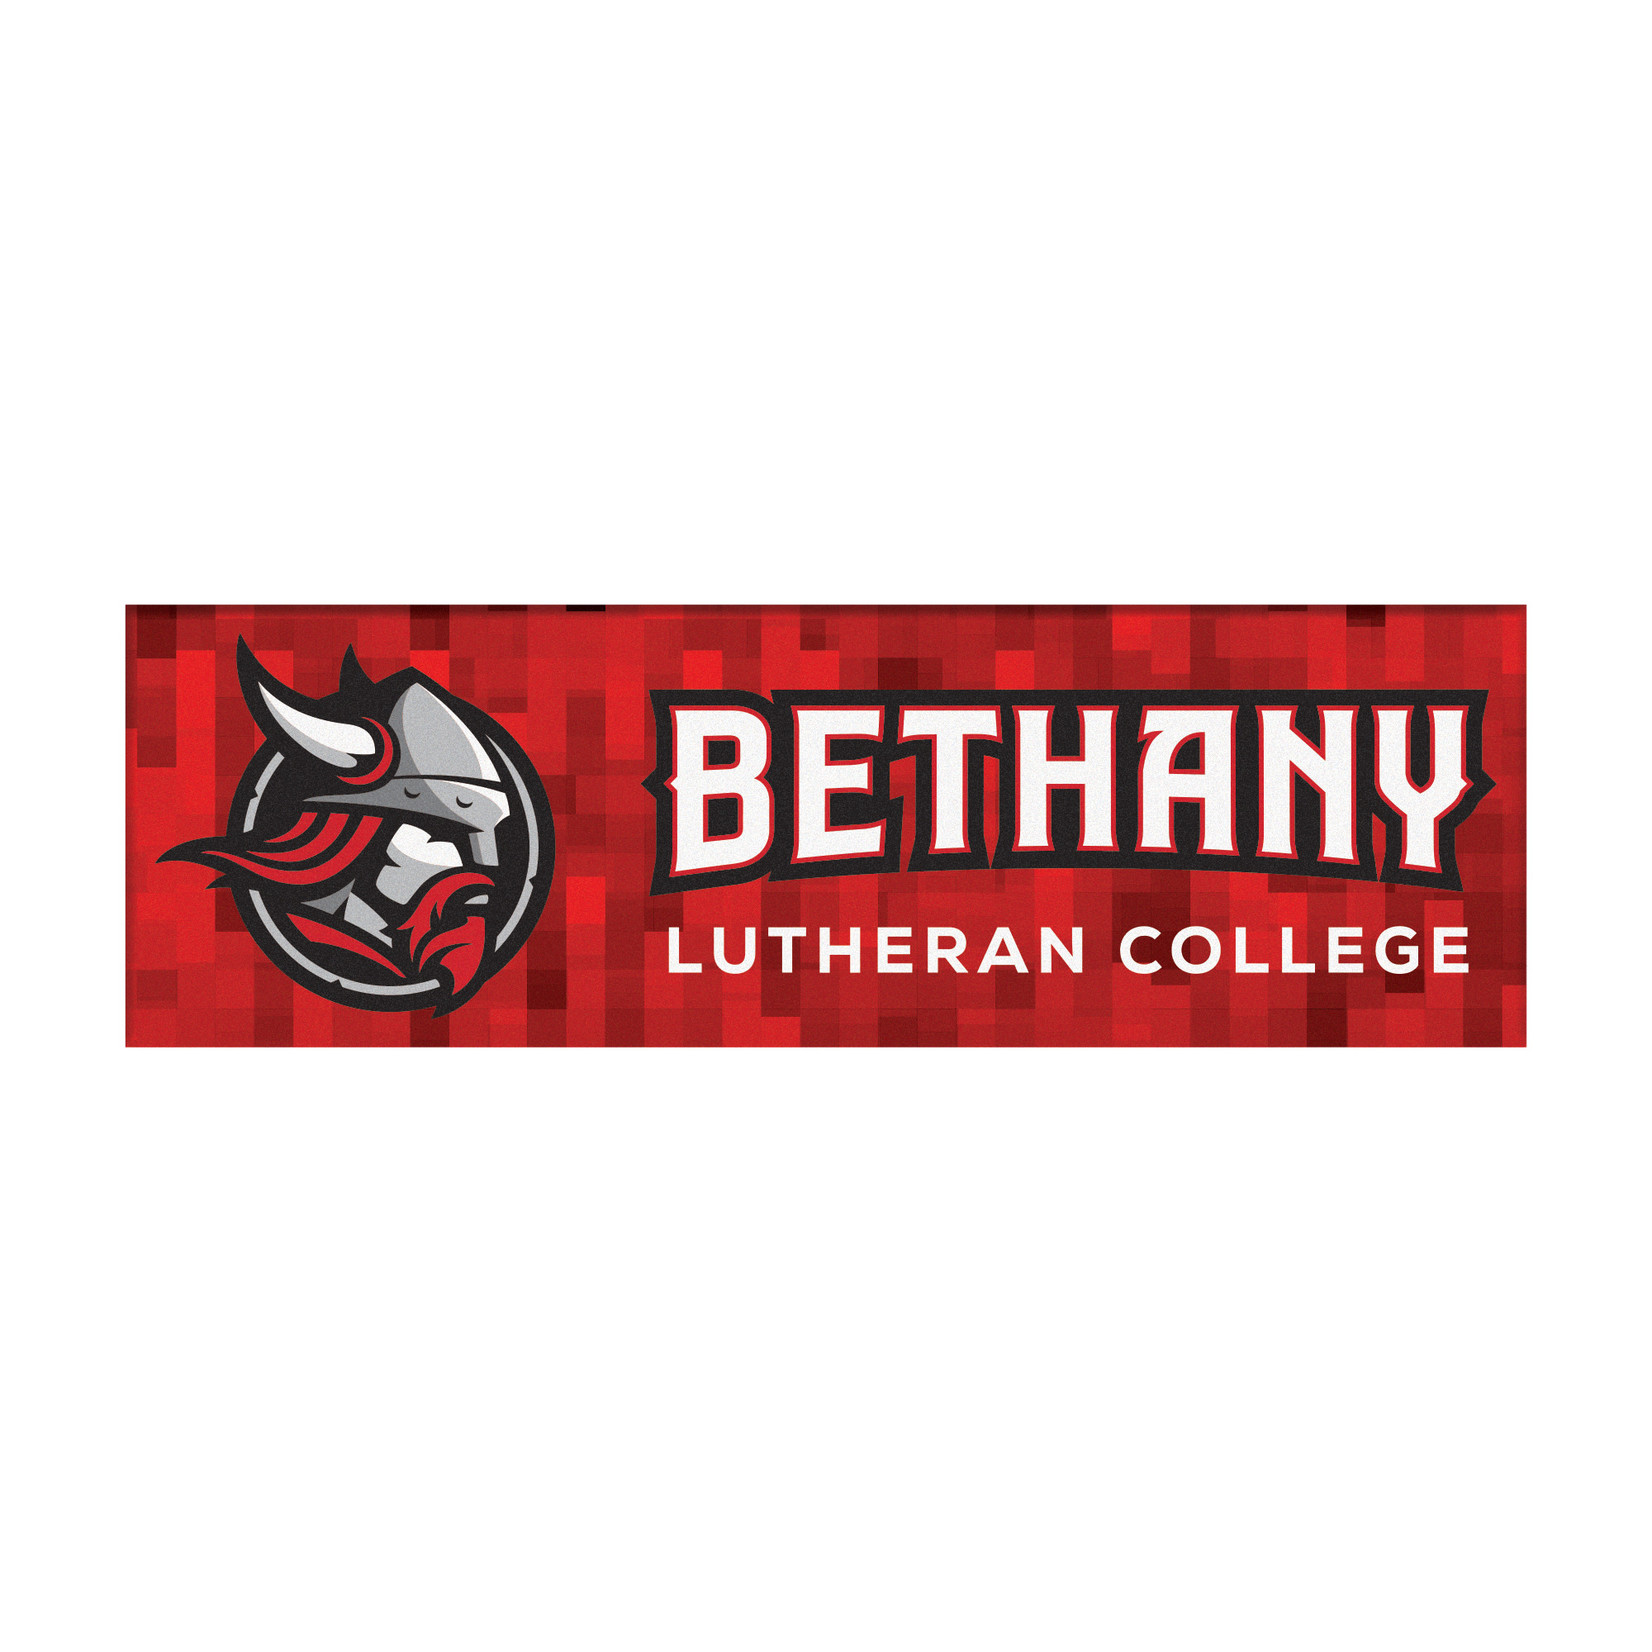 Spirit Products Bethany Lutheran College Collegiate Magnet